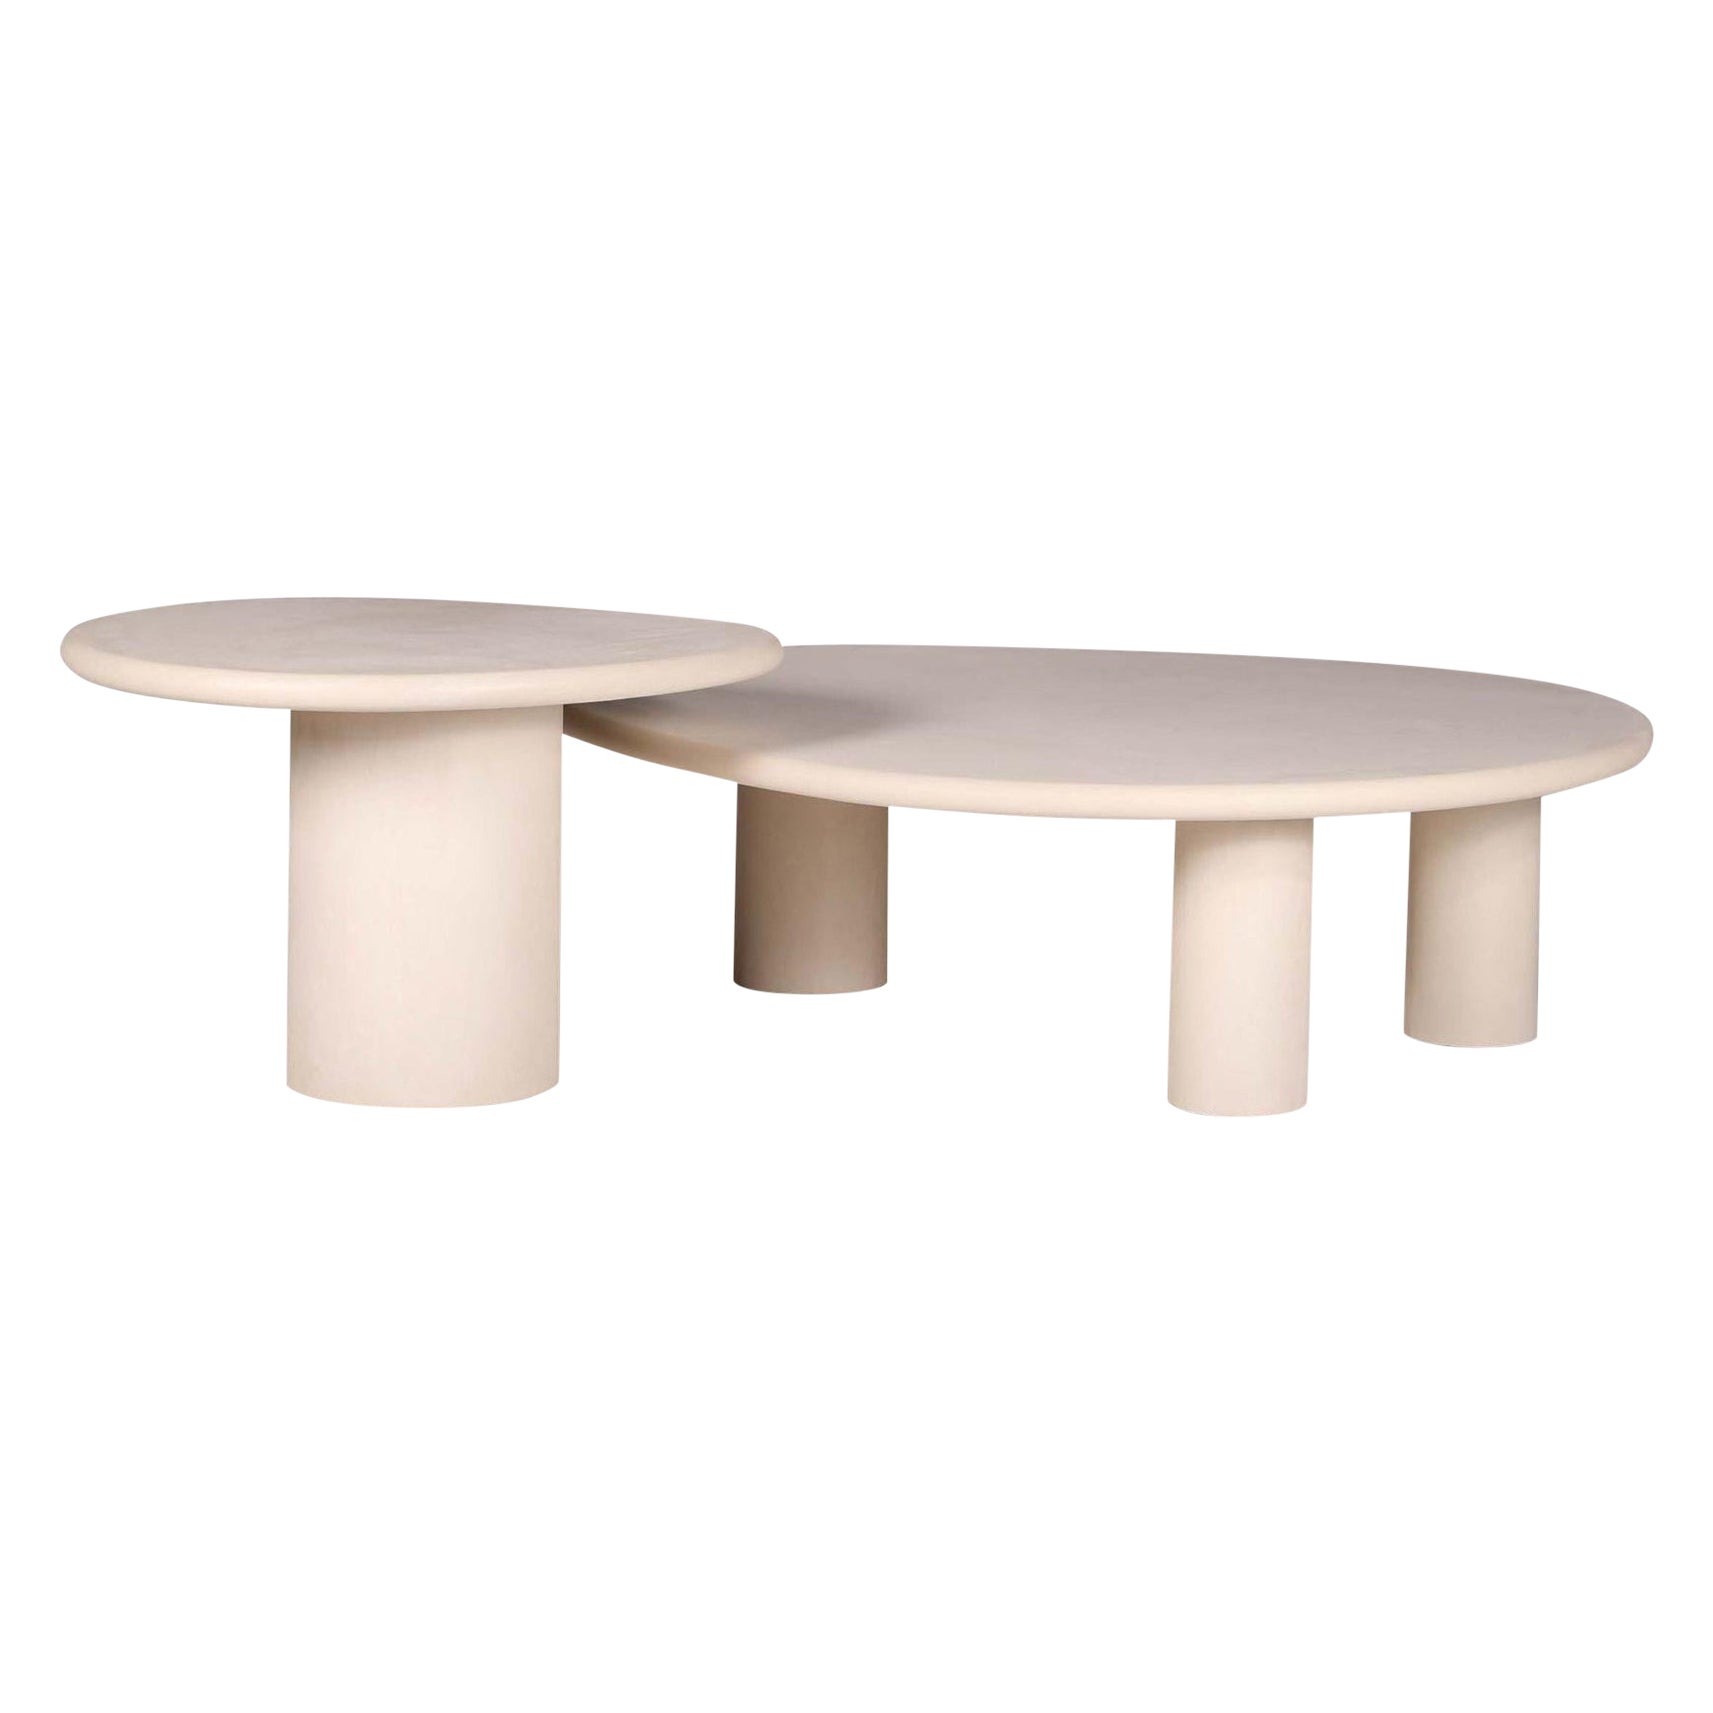 Handmade Rock-Shaped Natural Plaster Table Set by Philippe Colette